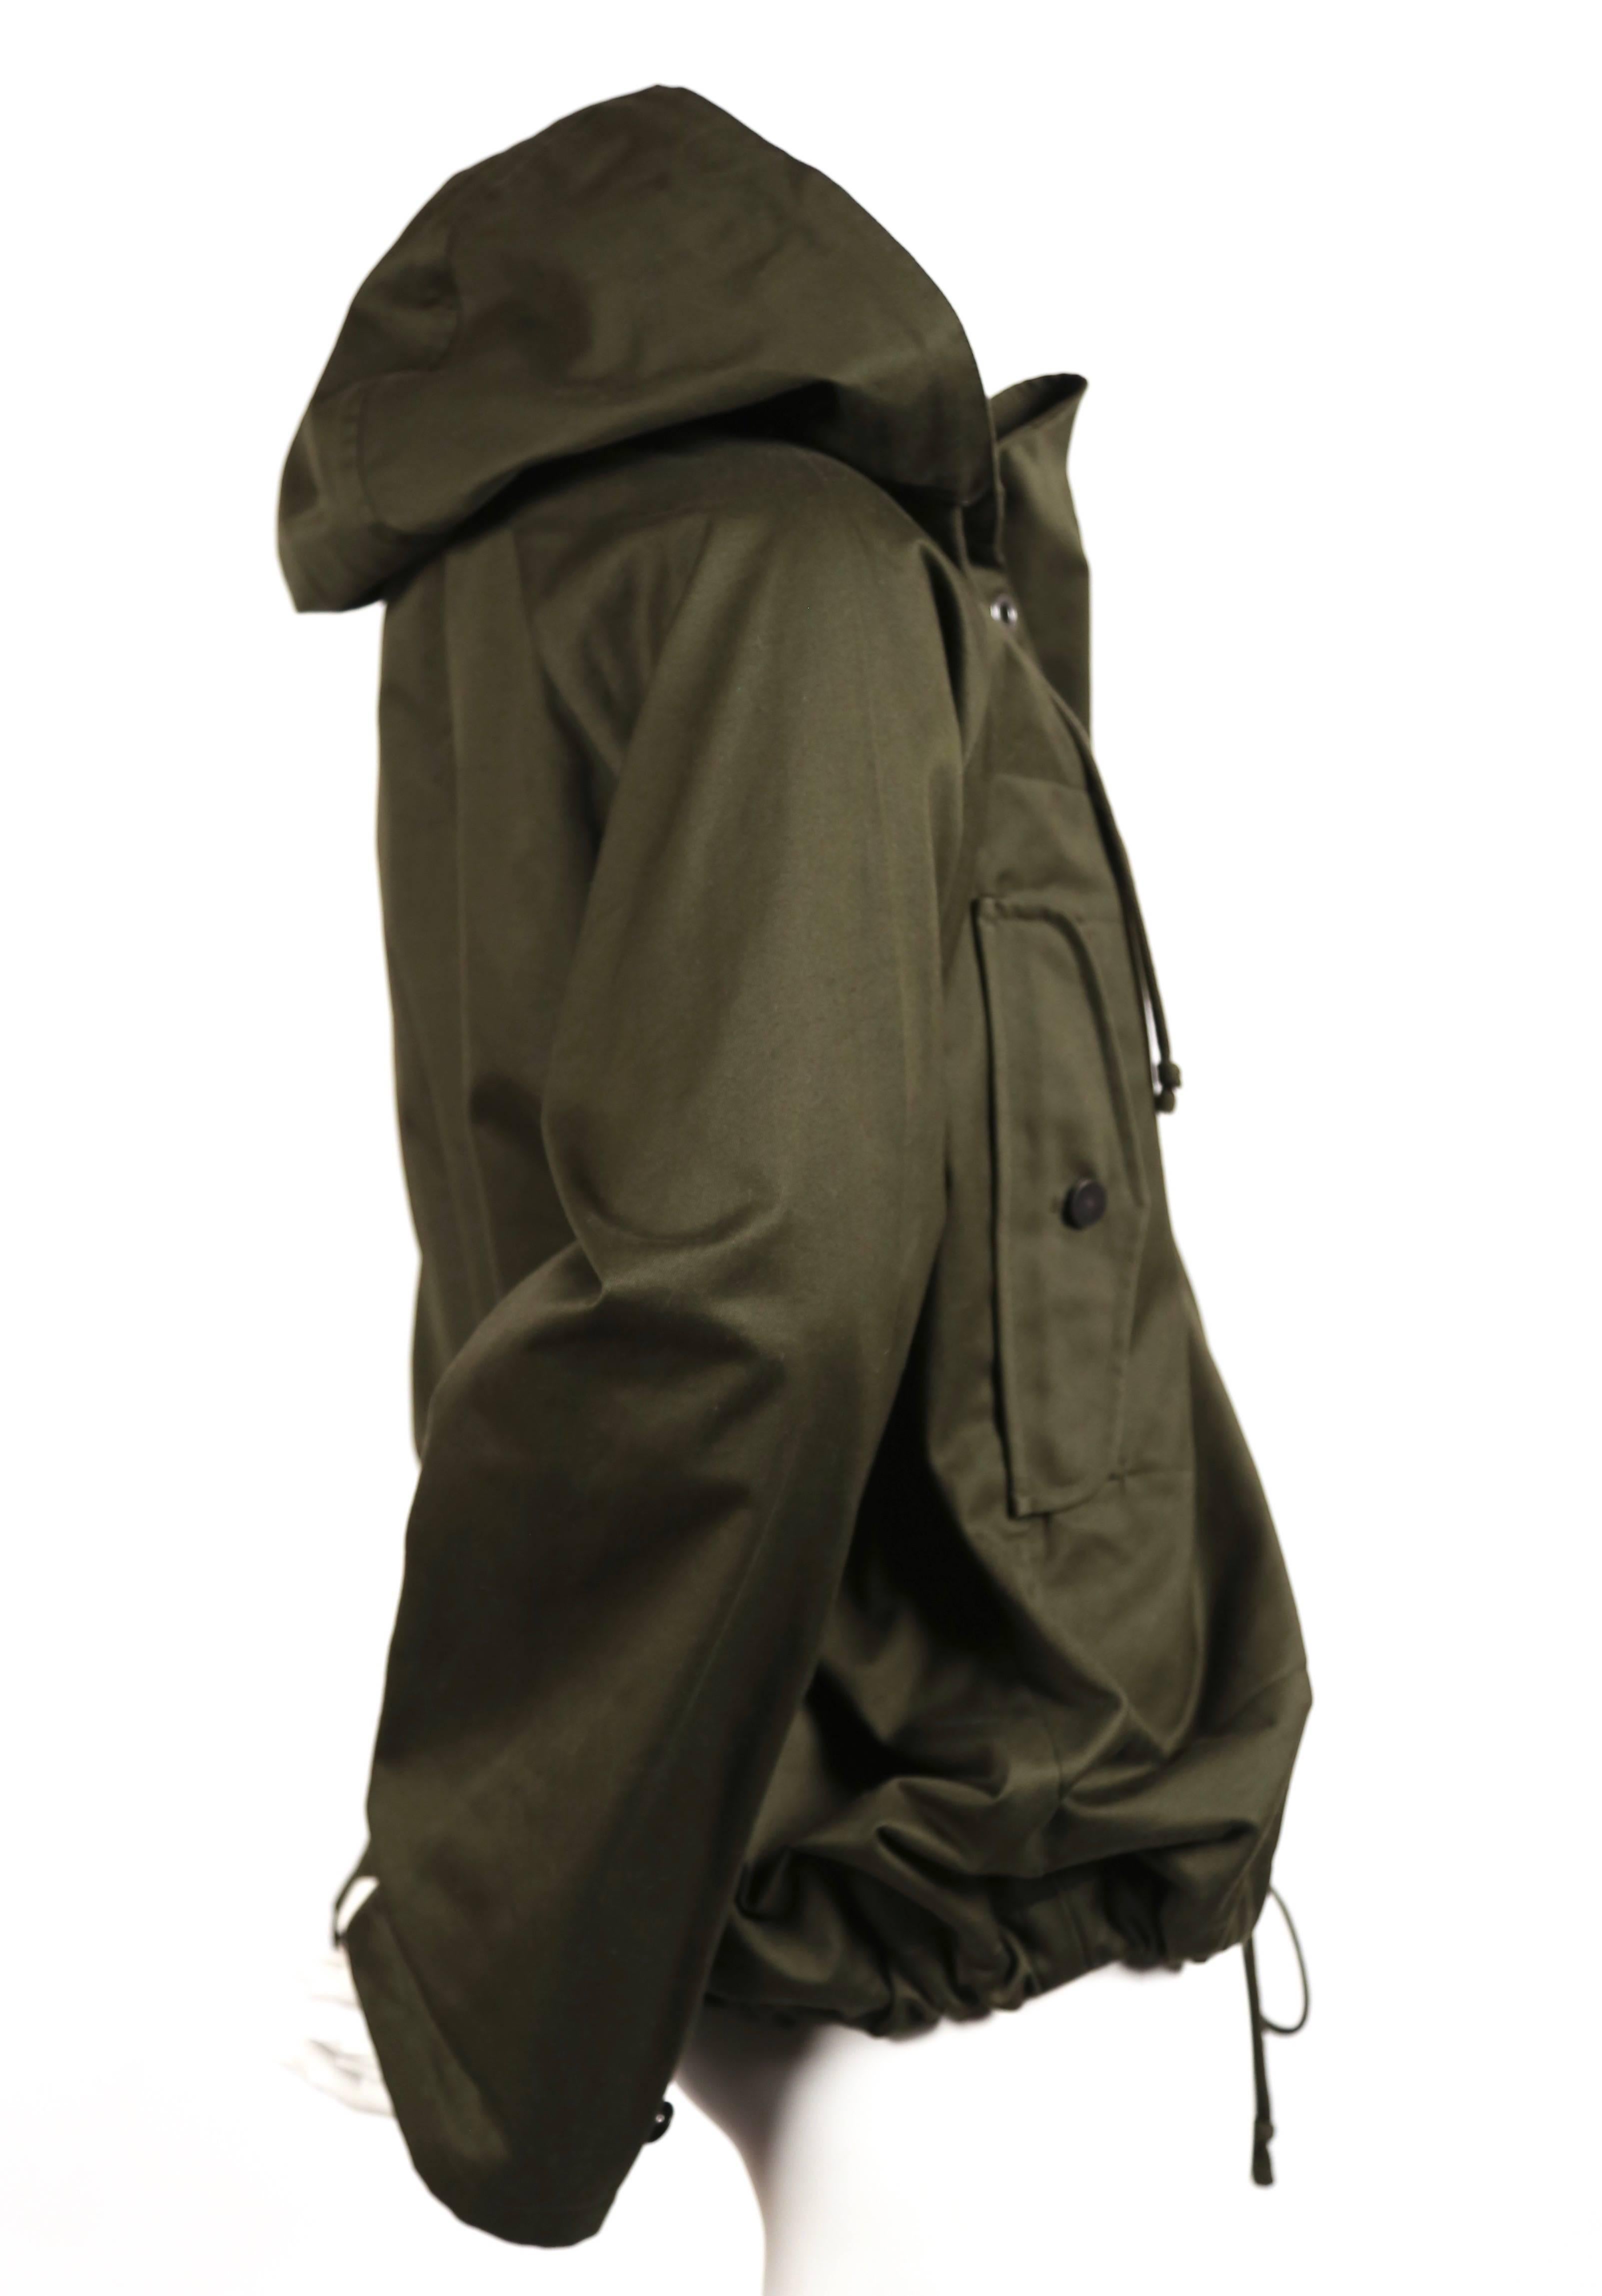 Celine By Phoebe Philo army green anorak jacket in polished cotton In Excellent Condition For Sale In San Fransisco, CA